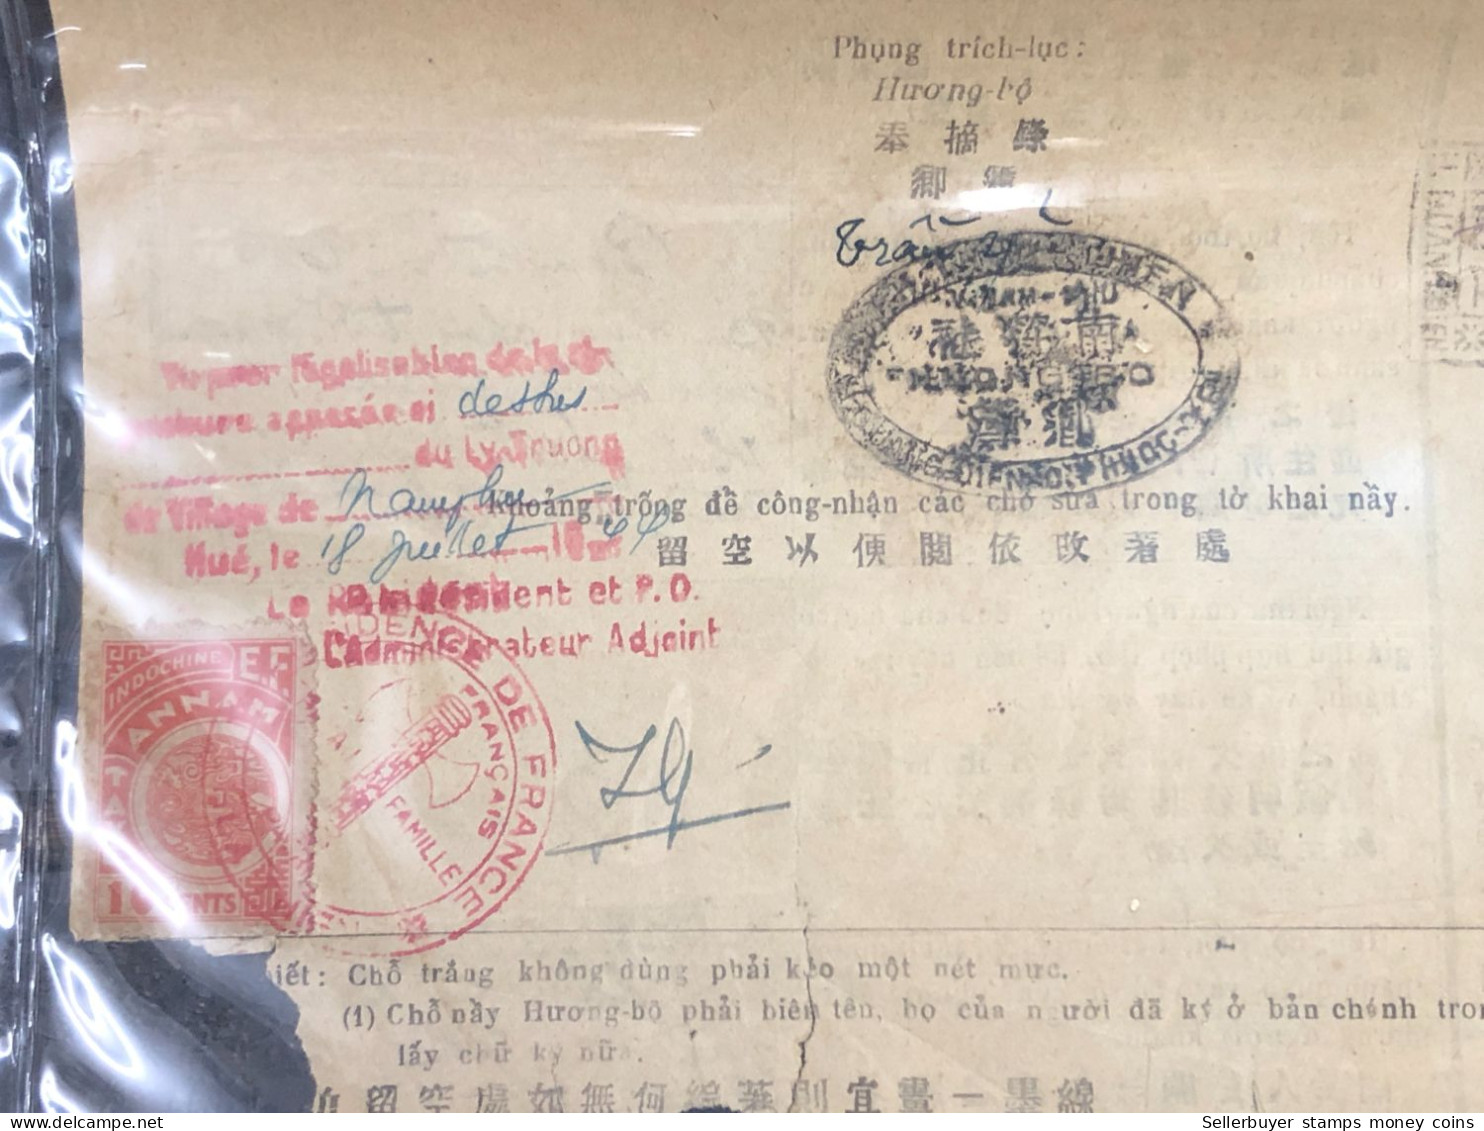 viet nam indo-chna PAPER have wedge 10cents annam before 1944 QUALITY:GOOD 1-PCS very rare